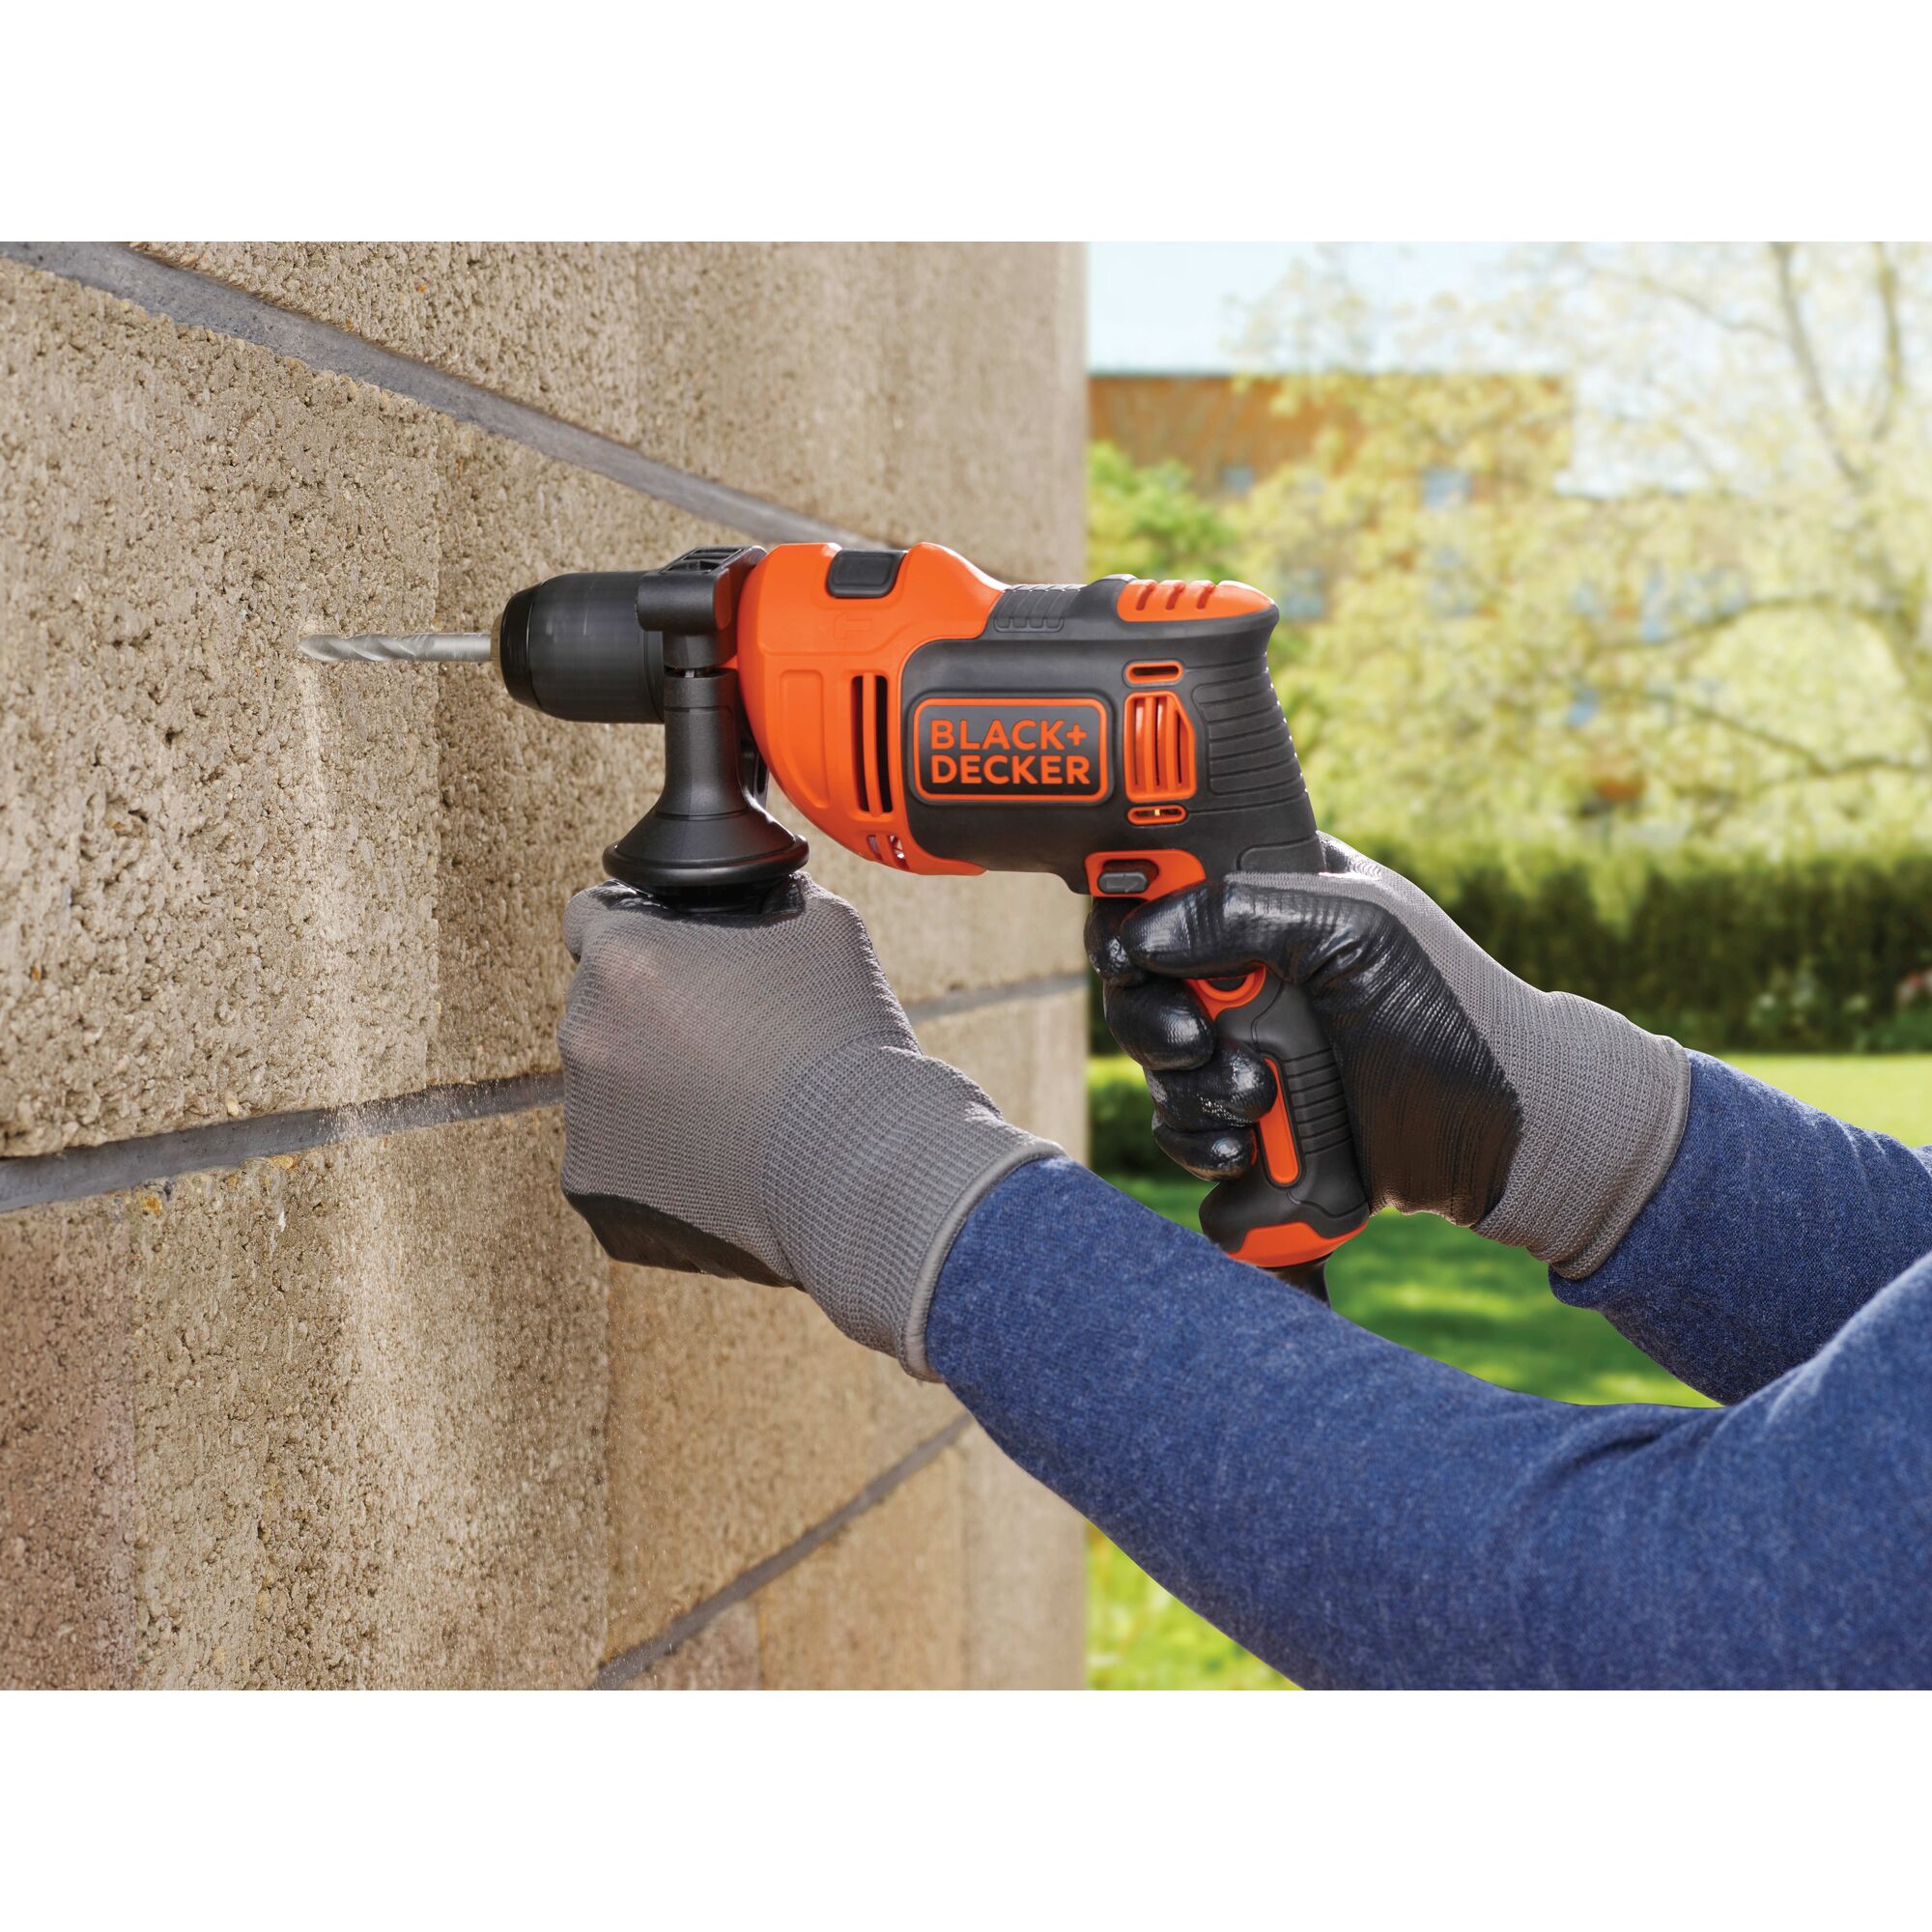 6.5 Ampere half inch hammer drill being used by a person to drill a hole in brick.